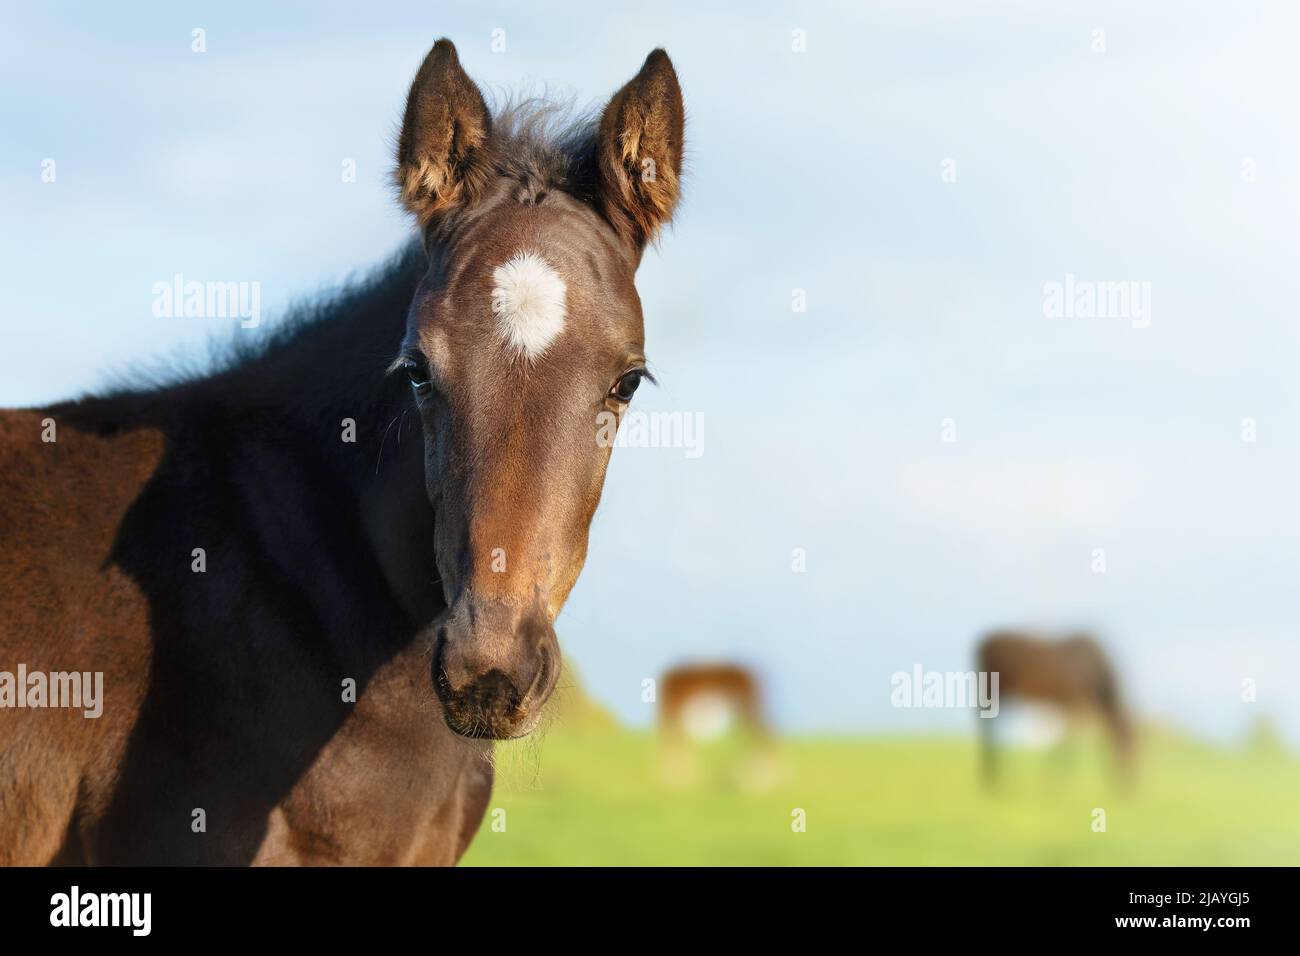 The foal head is a close-up. Portrait of a thoroughbred colt grazing in a meadow. Pasture on a sunny summer day. Summer background Stock Photo